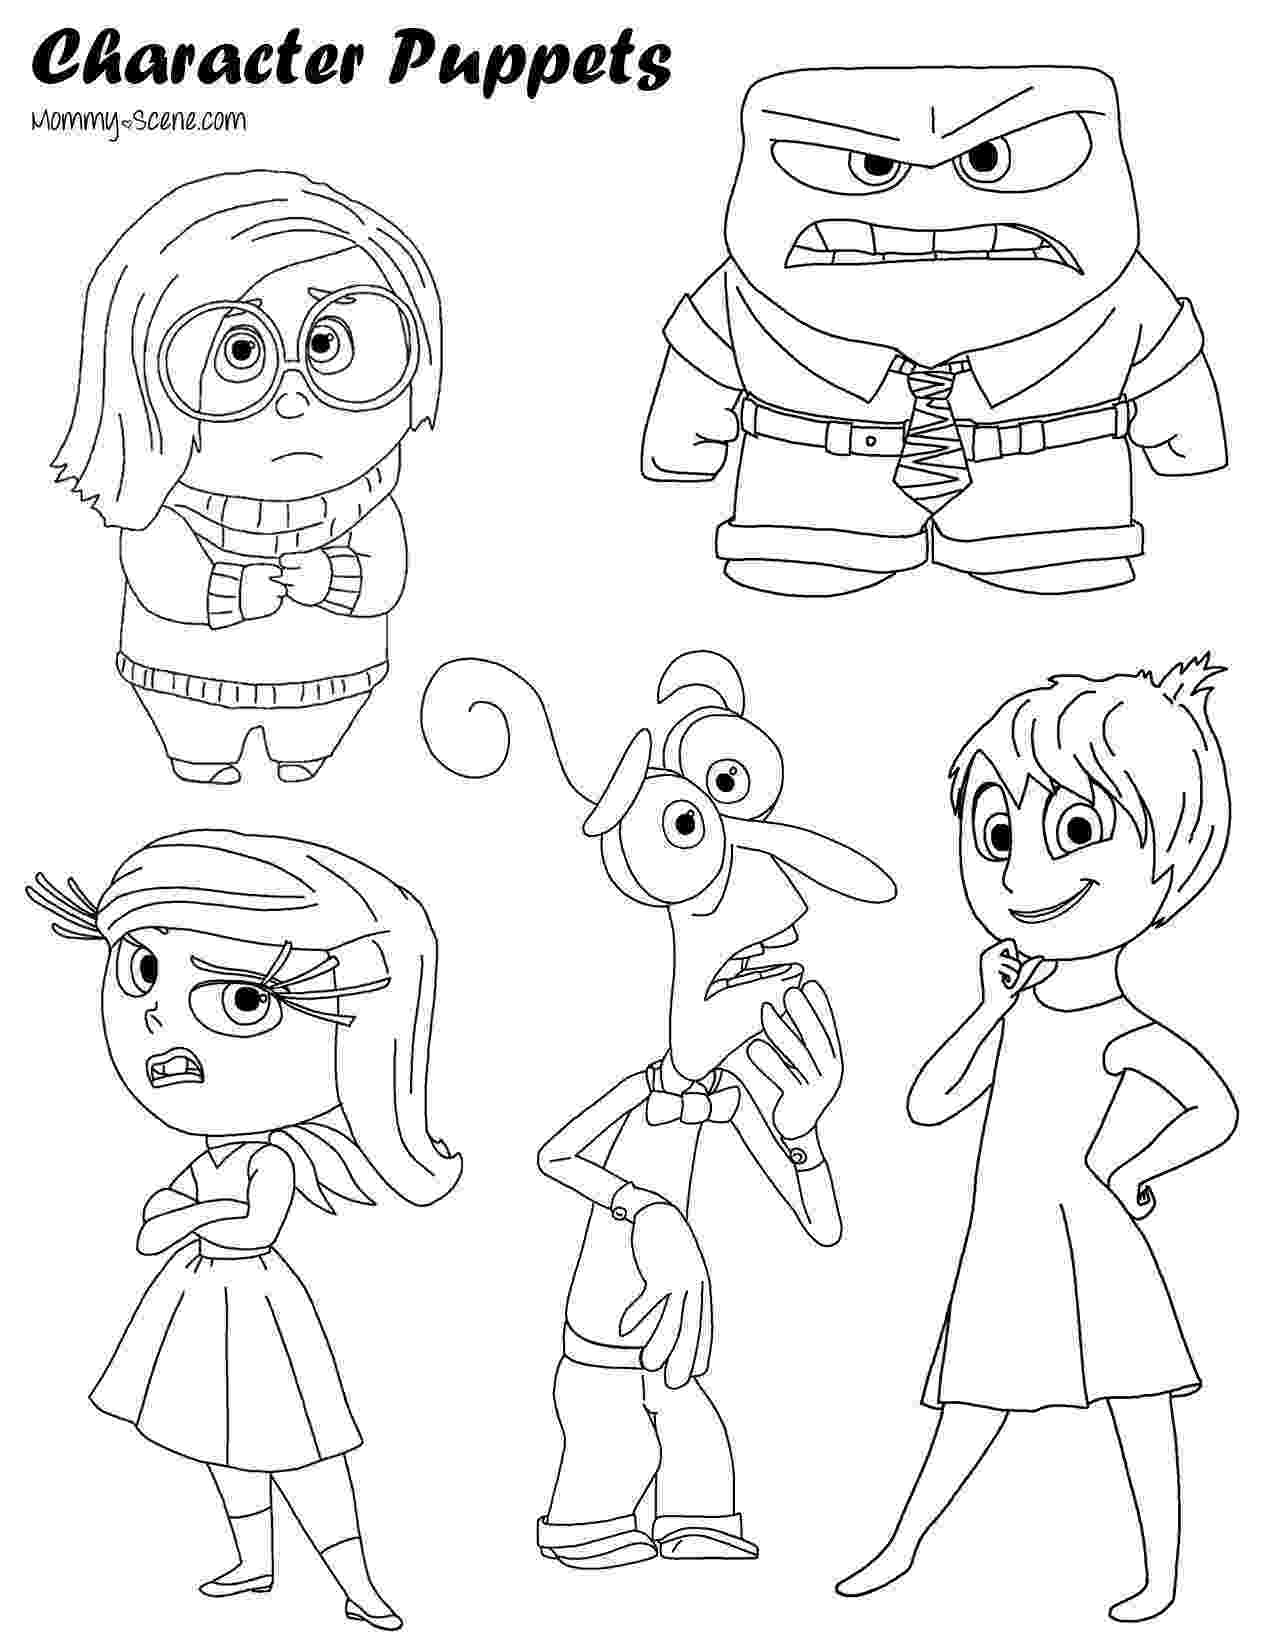 inside out coloring pages all characters paper character puppets puppet crafts puppet and scene pages out characters coloring inside all 